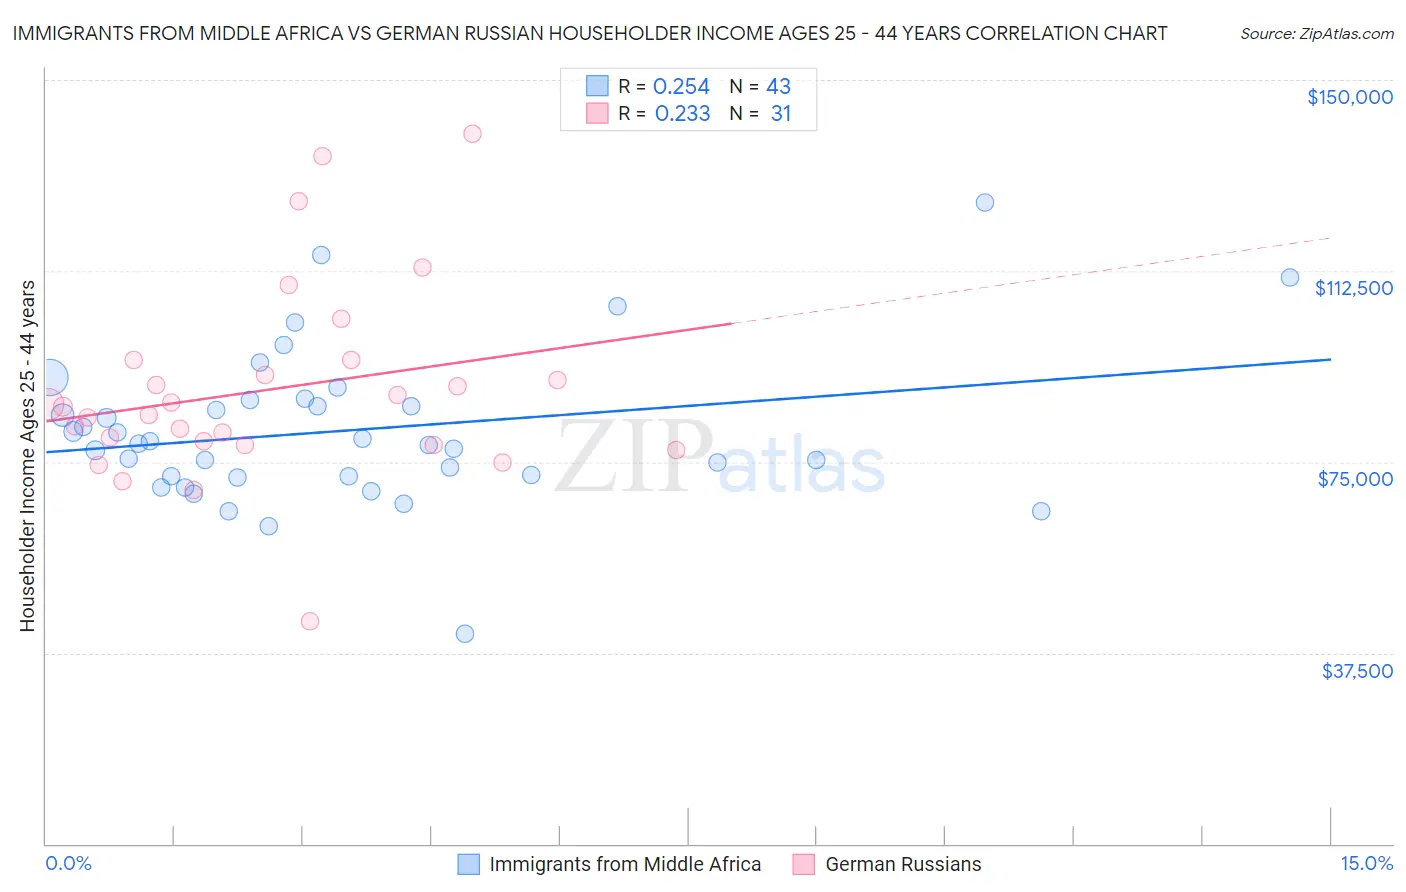 Immigrants from Middle Africa vs German Russian Householder Income Ages 25 - 44 years